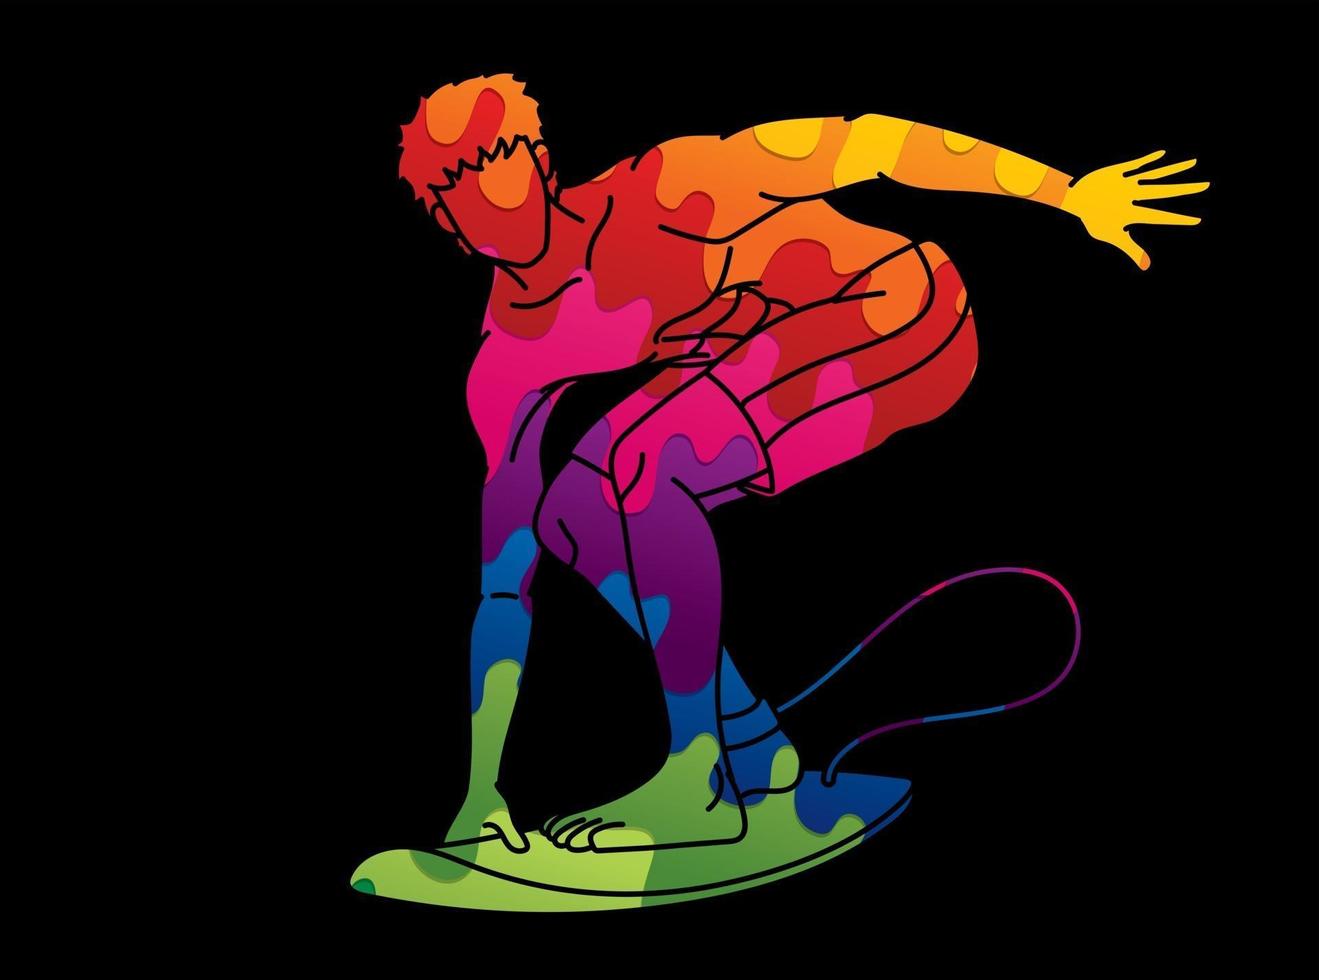 Abstract Man Surfer Surfing Sport Action vector